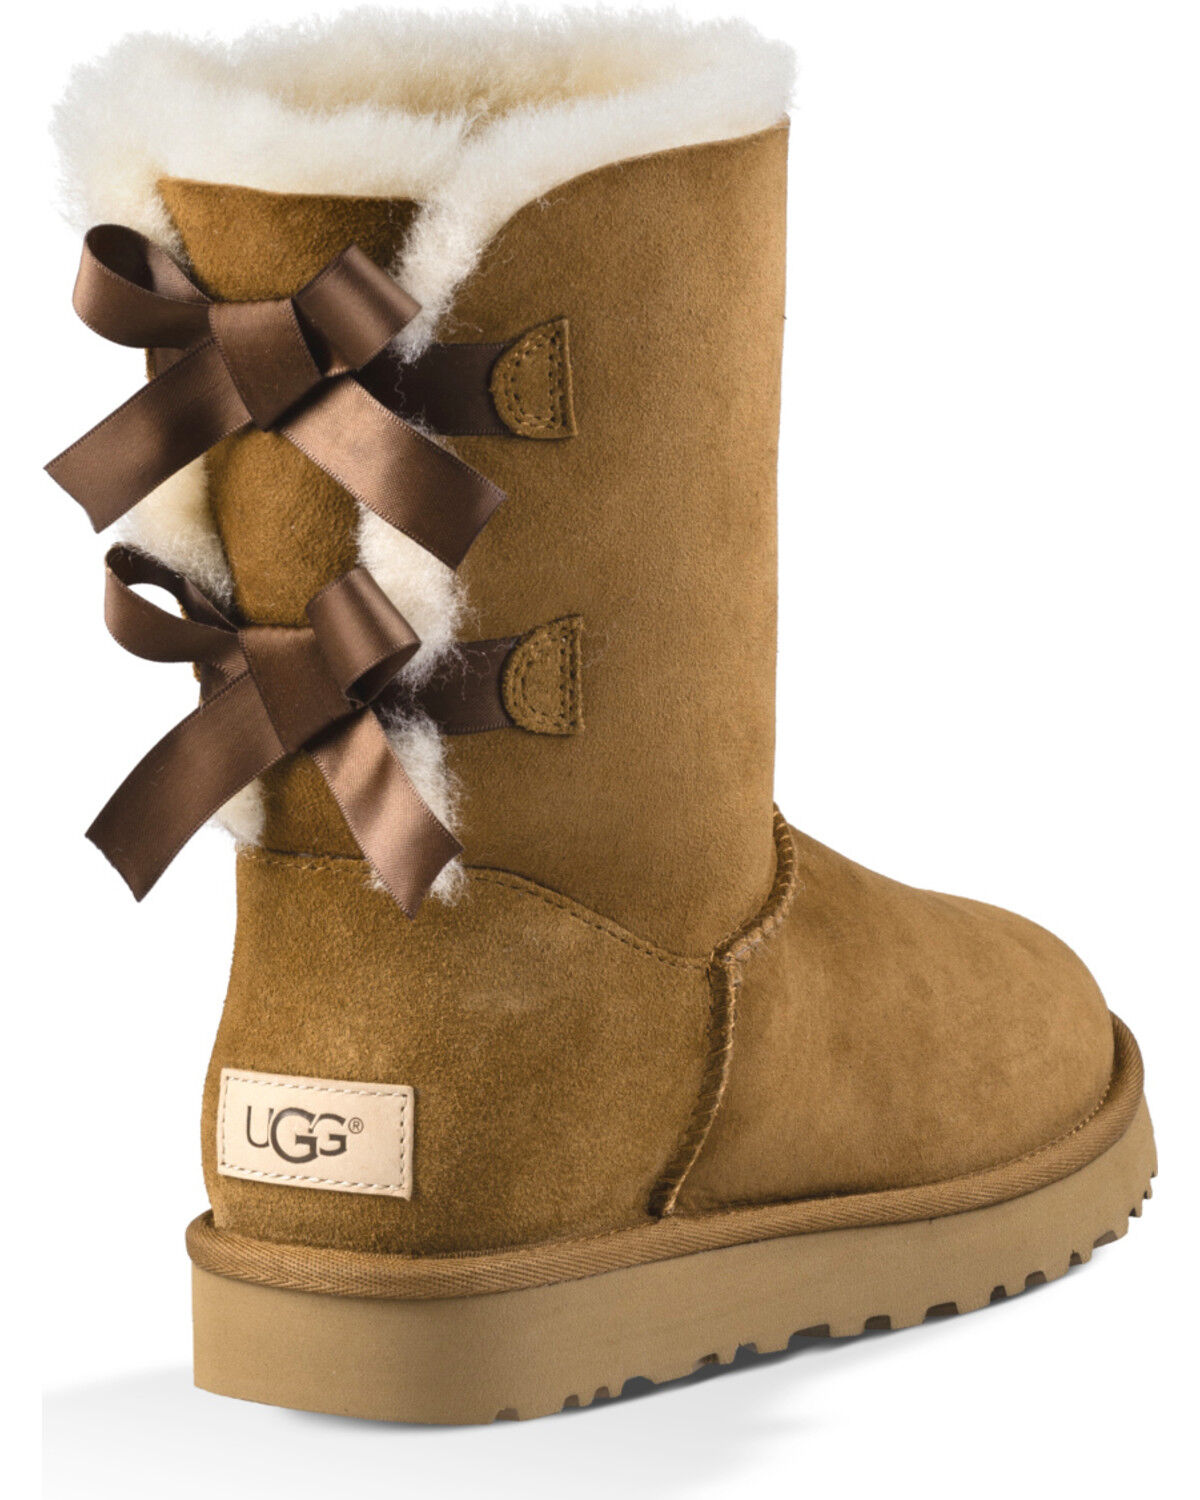 UGG Women's Bailey Bow Ii Boots, Chestnut, 8 M